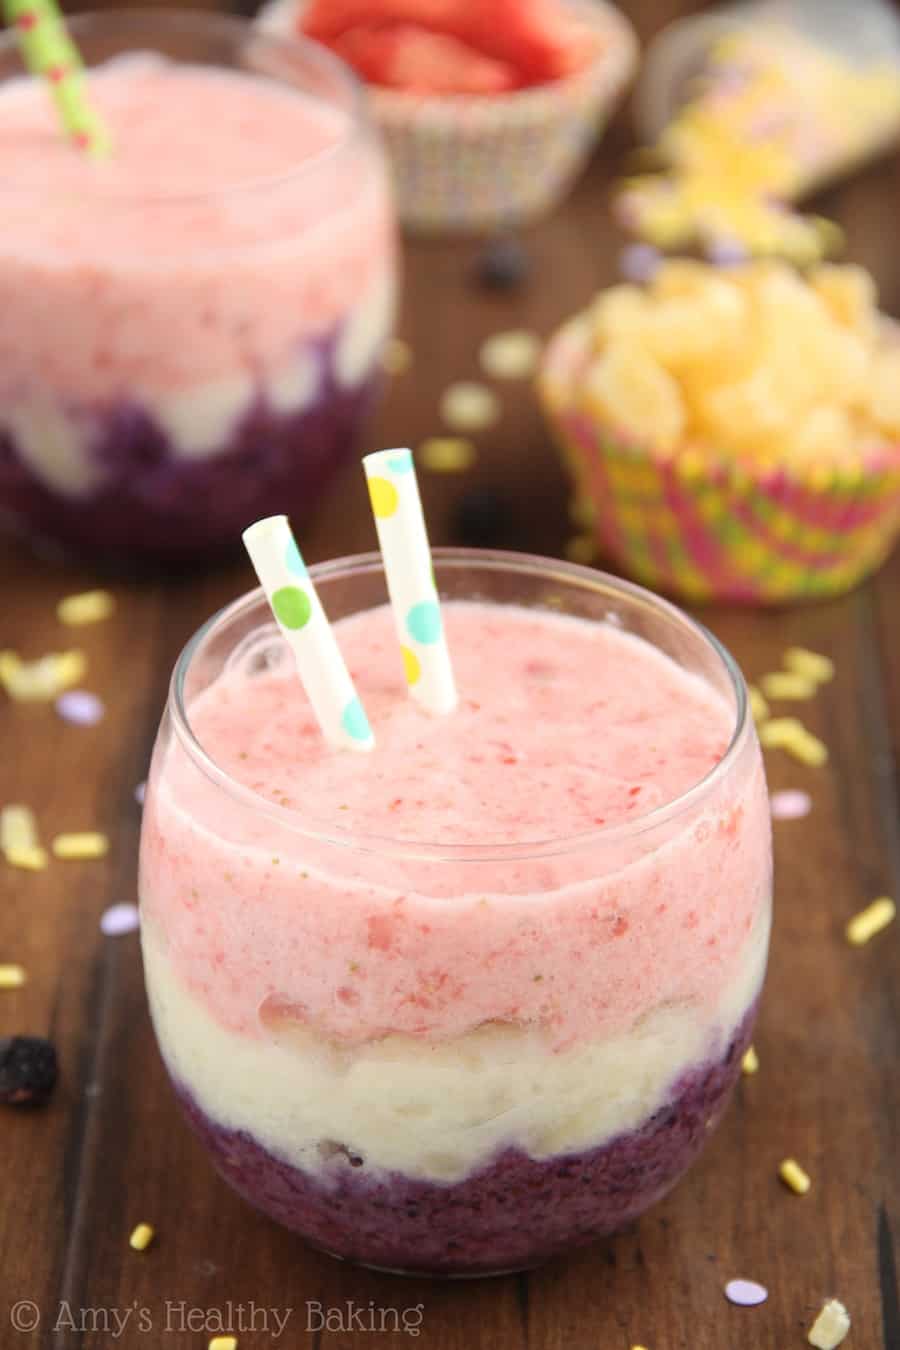 Cute little clear glass filled with 3 layers of smoothy flavors: dark purple, white, and pink with 2 polka dotted straws